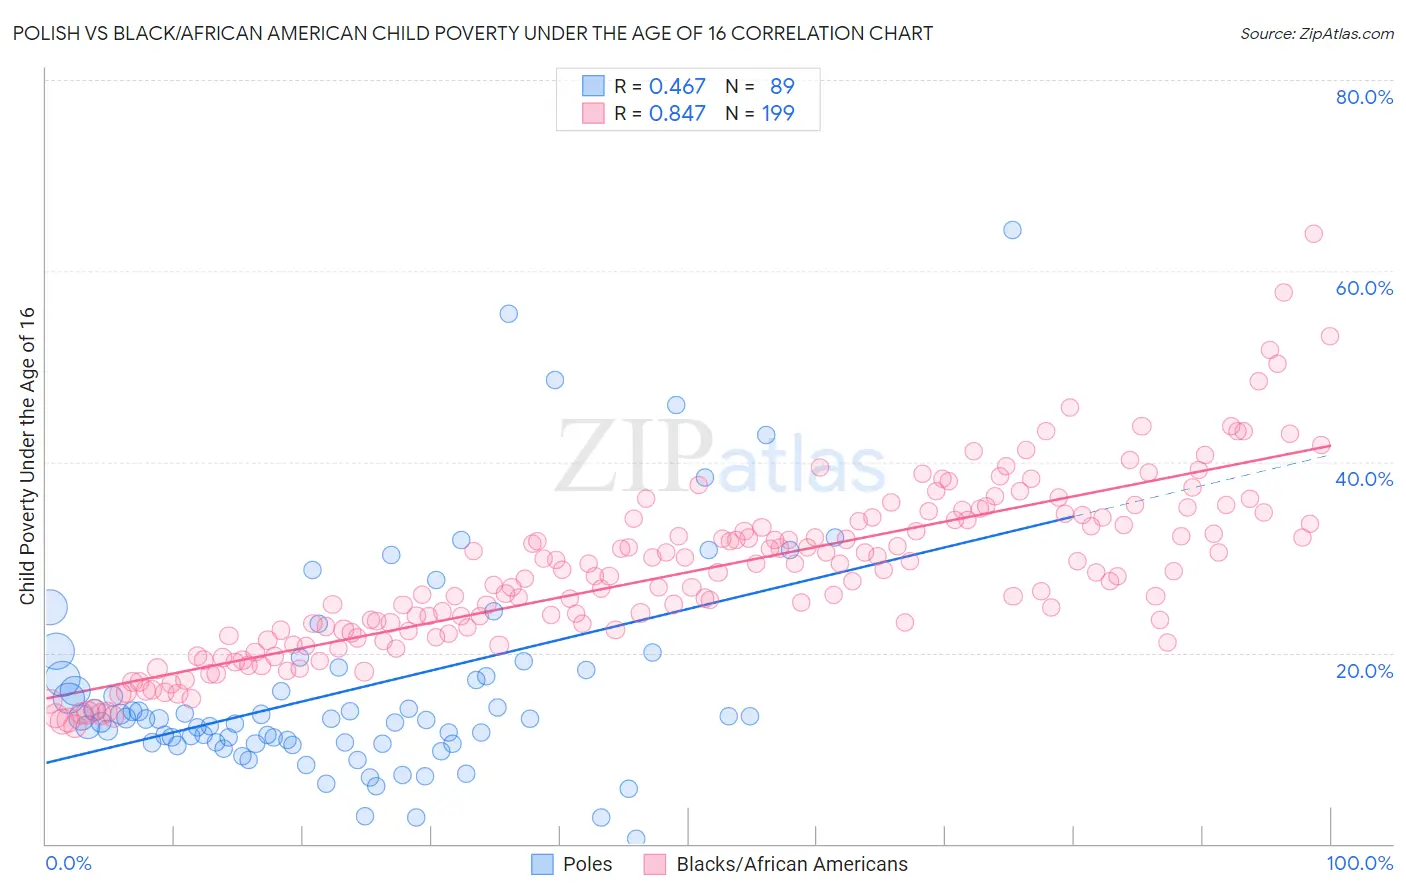 Polish vs Black/African American Child Poverty Under the Age of 16